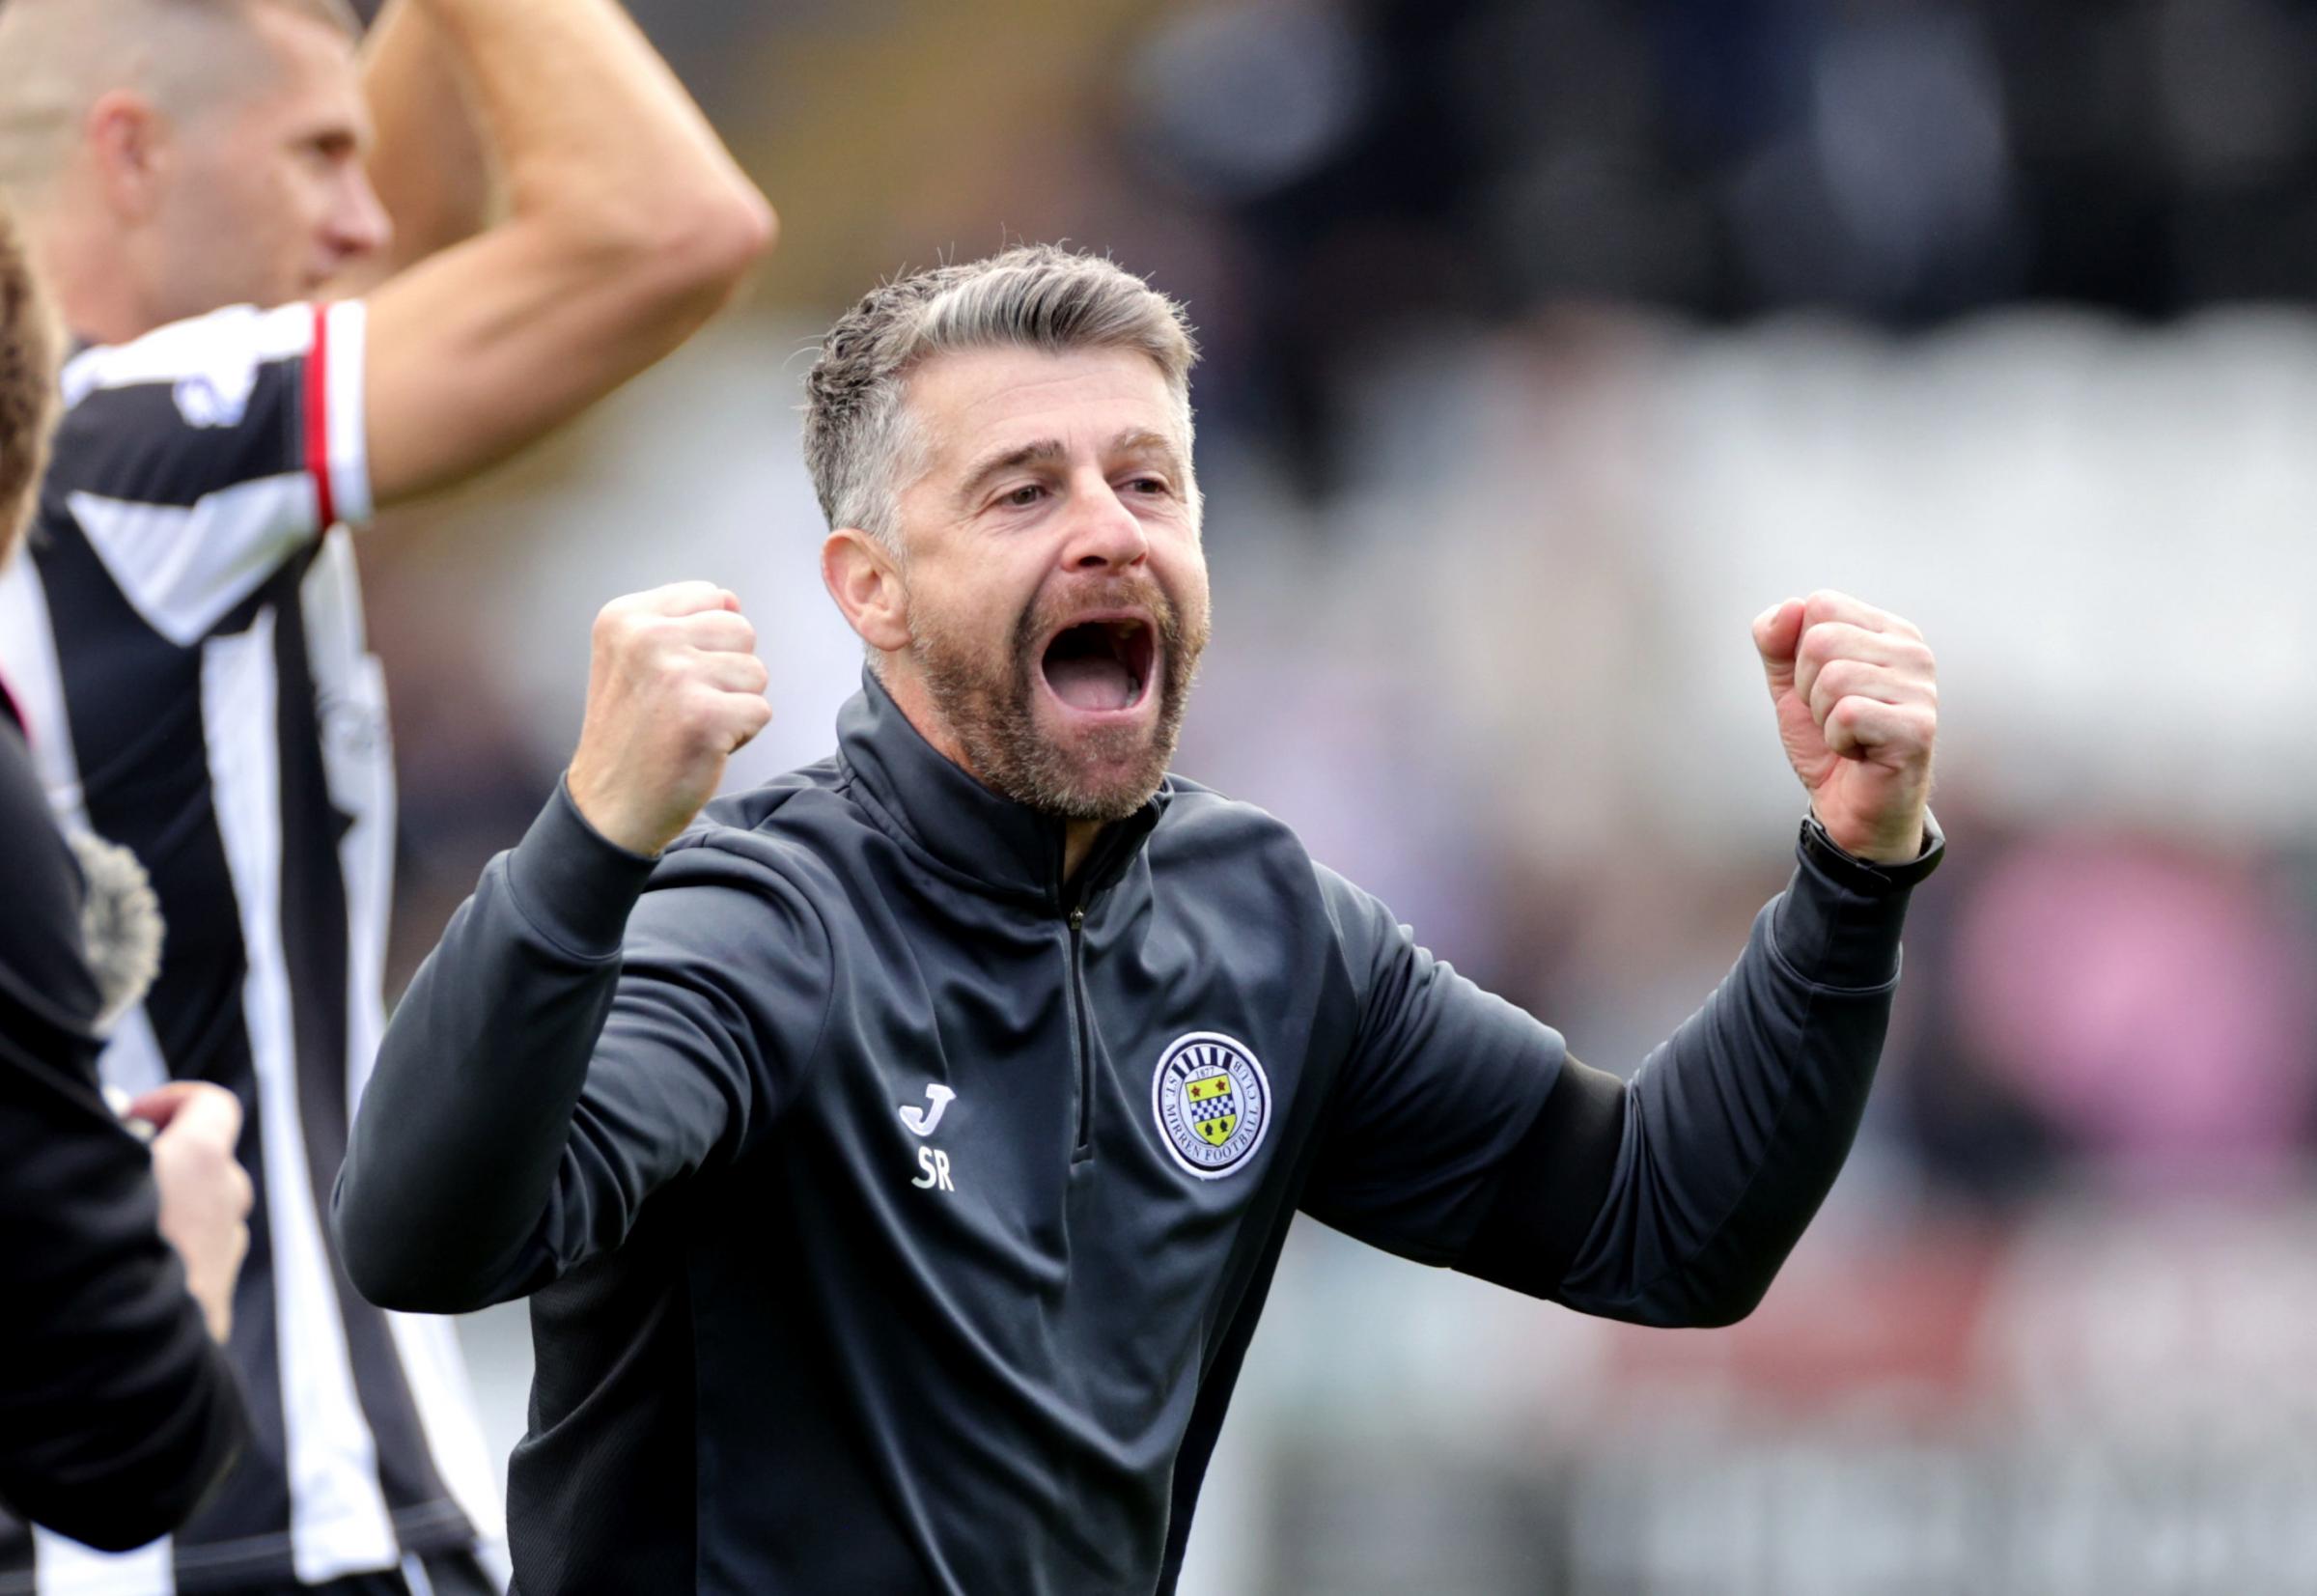 St Mirren players ‘wanted to die for one another’ says proud manager Stephen Robinson after beating Celtic